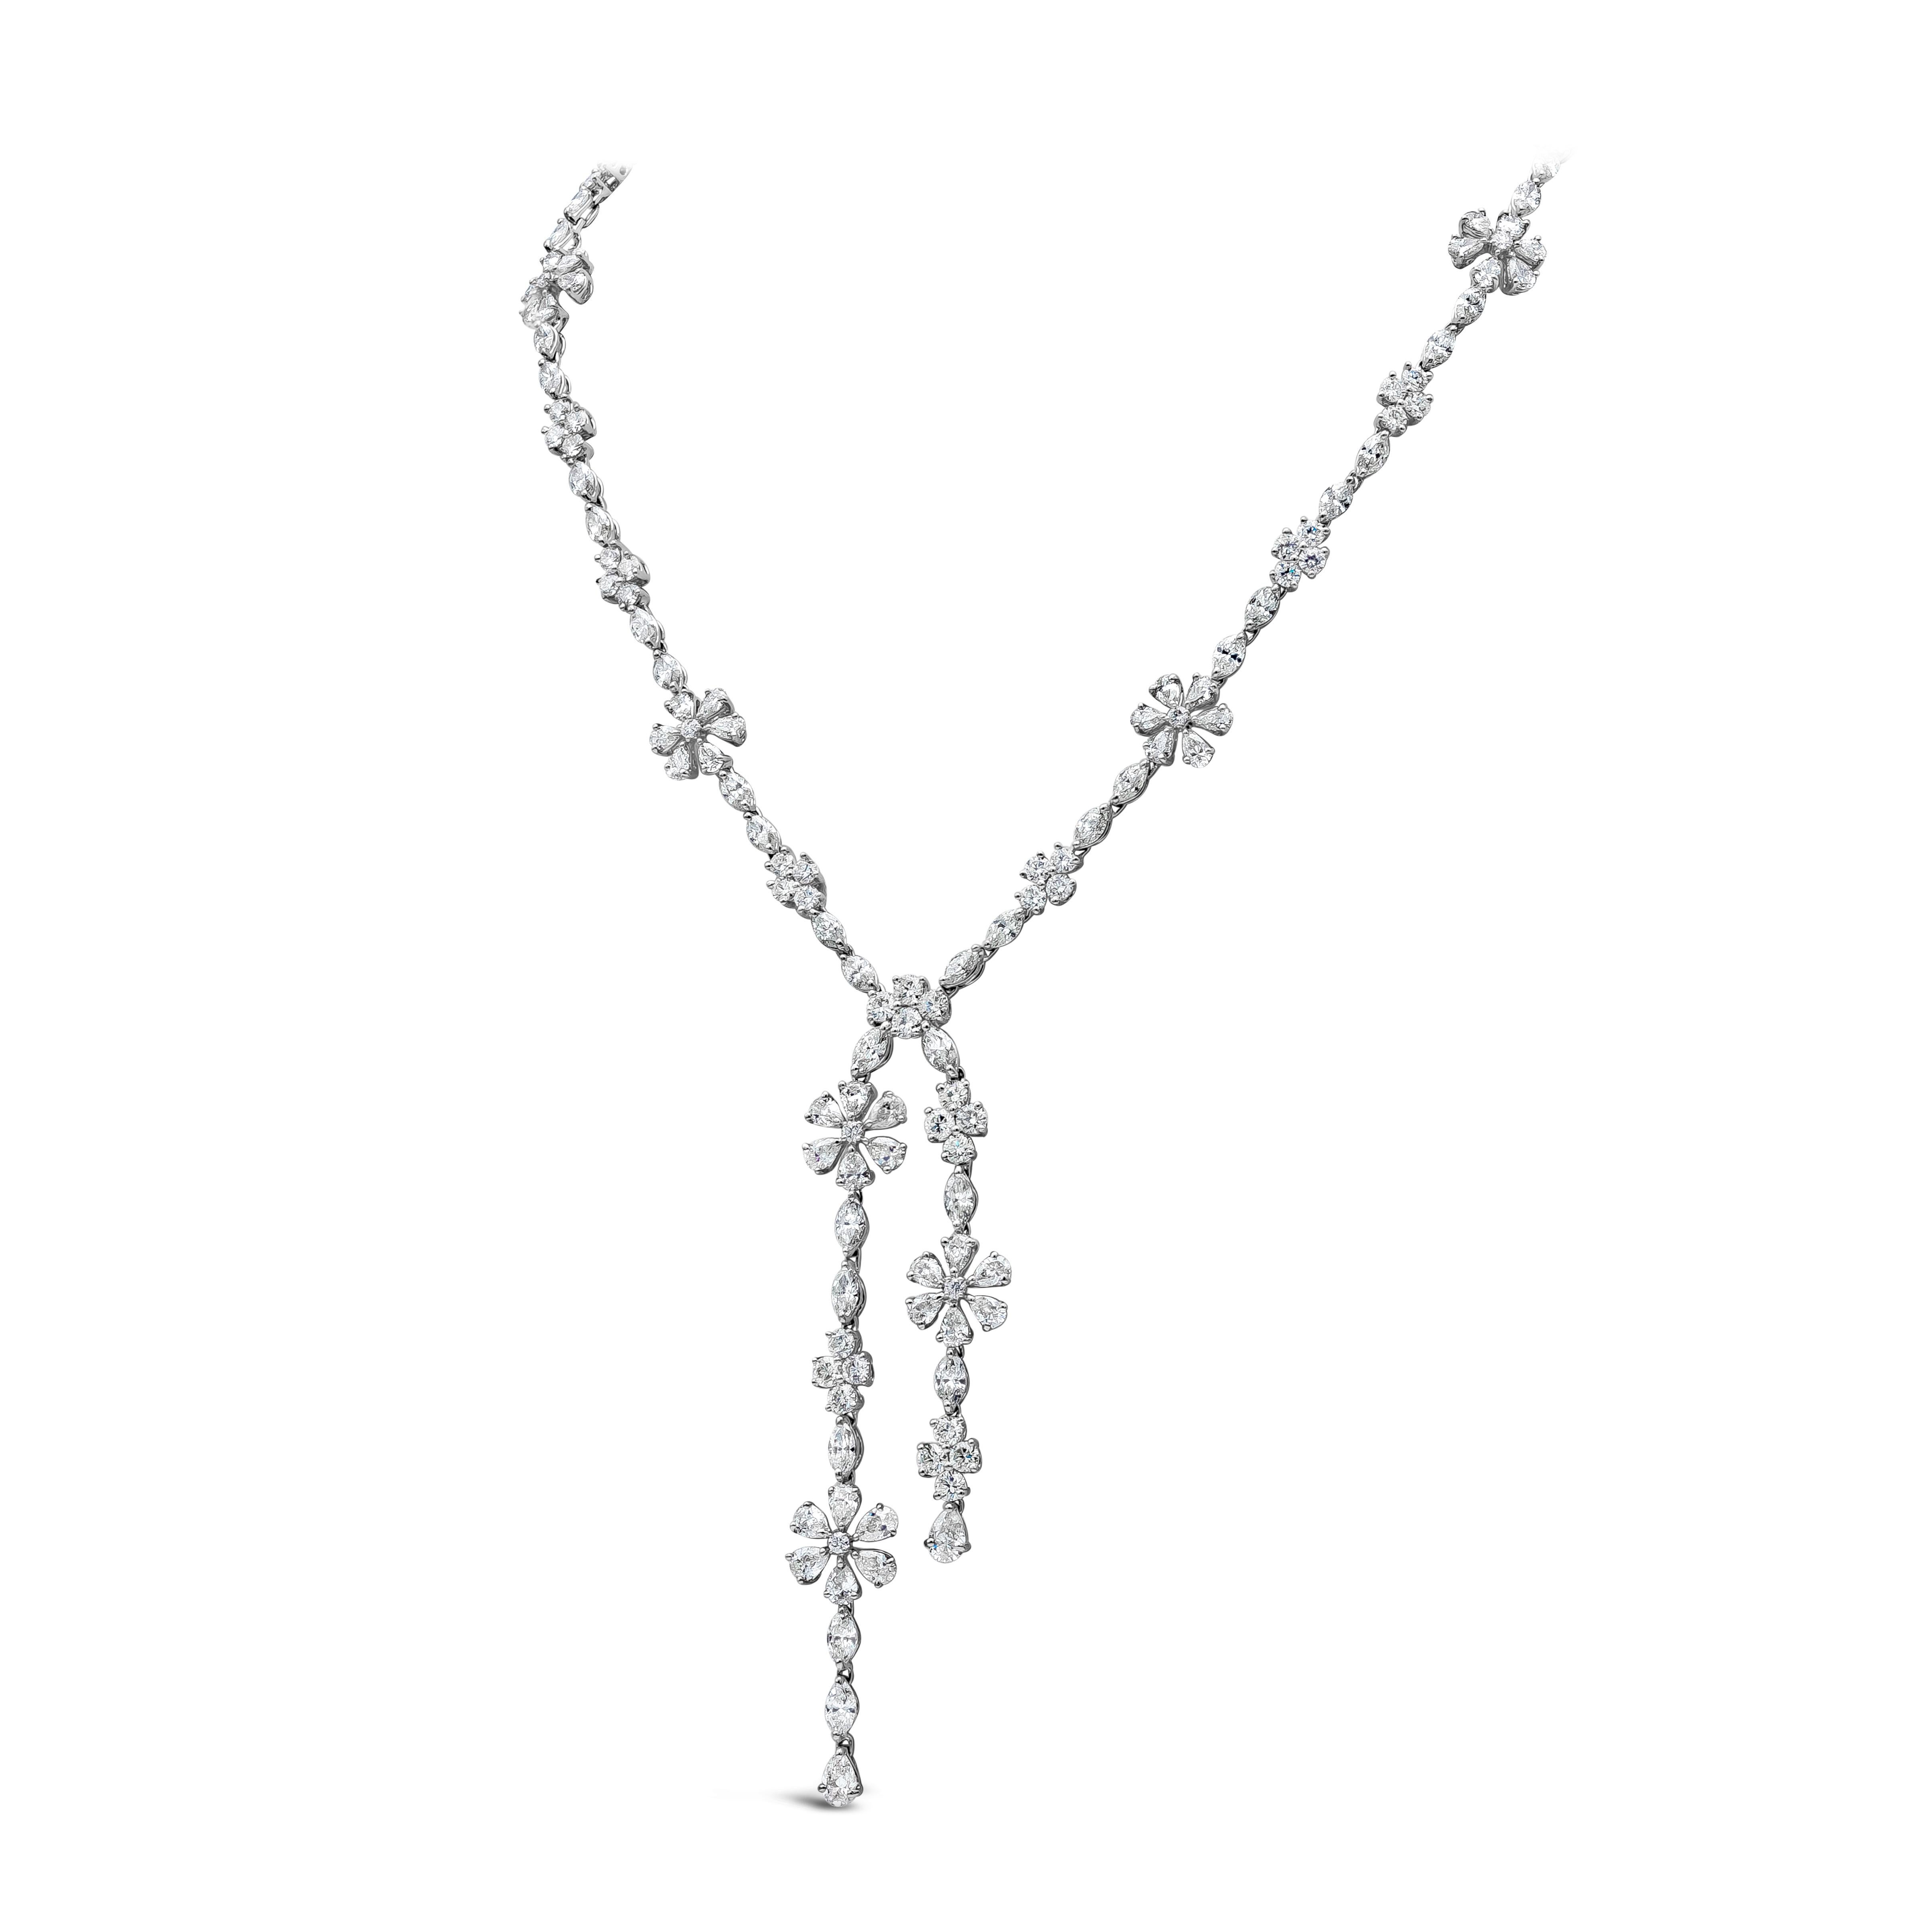 An elegant mixed-cut diamond necklace, showcasing 83 round diamonds weighing 7.41 carats, 49 marquise cut diamonds weighing 9.99 carats, and 44 pear shape diamonds weighing 7.37 carats for a total weight of 24.77 carats. Designed with a flower motif